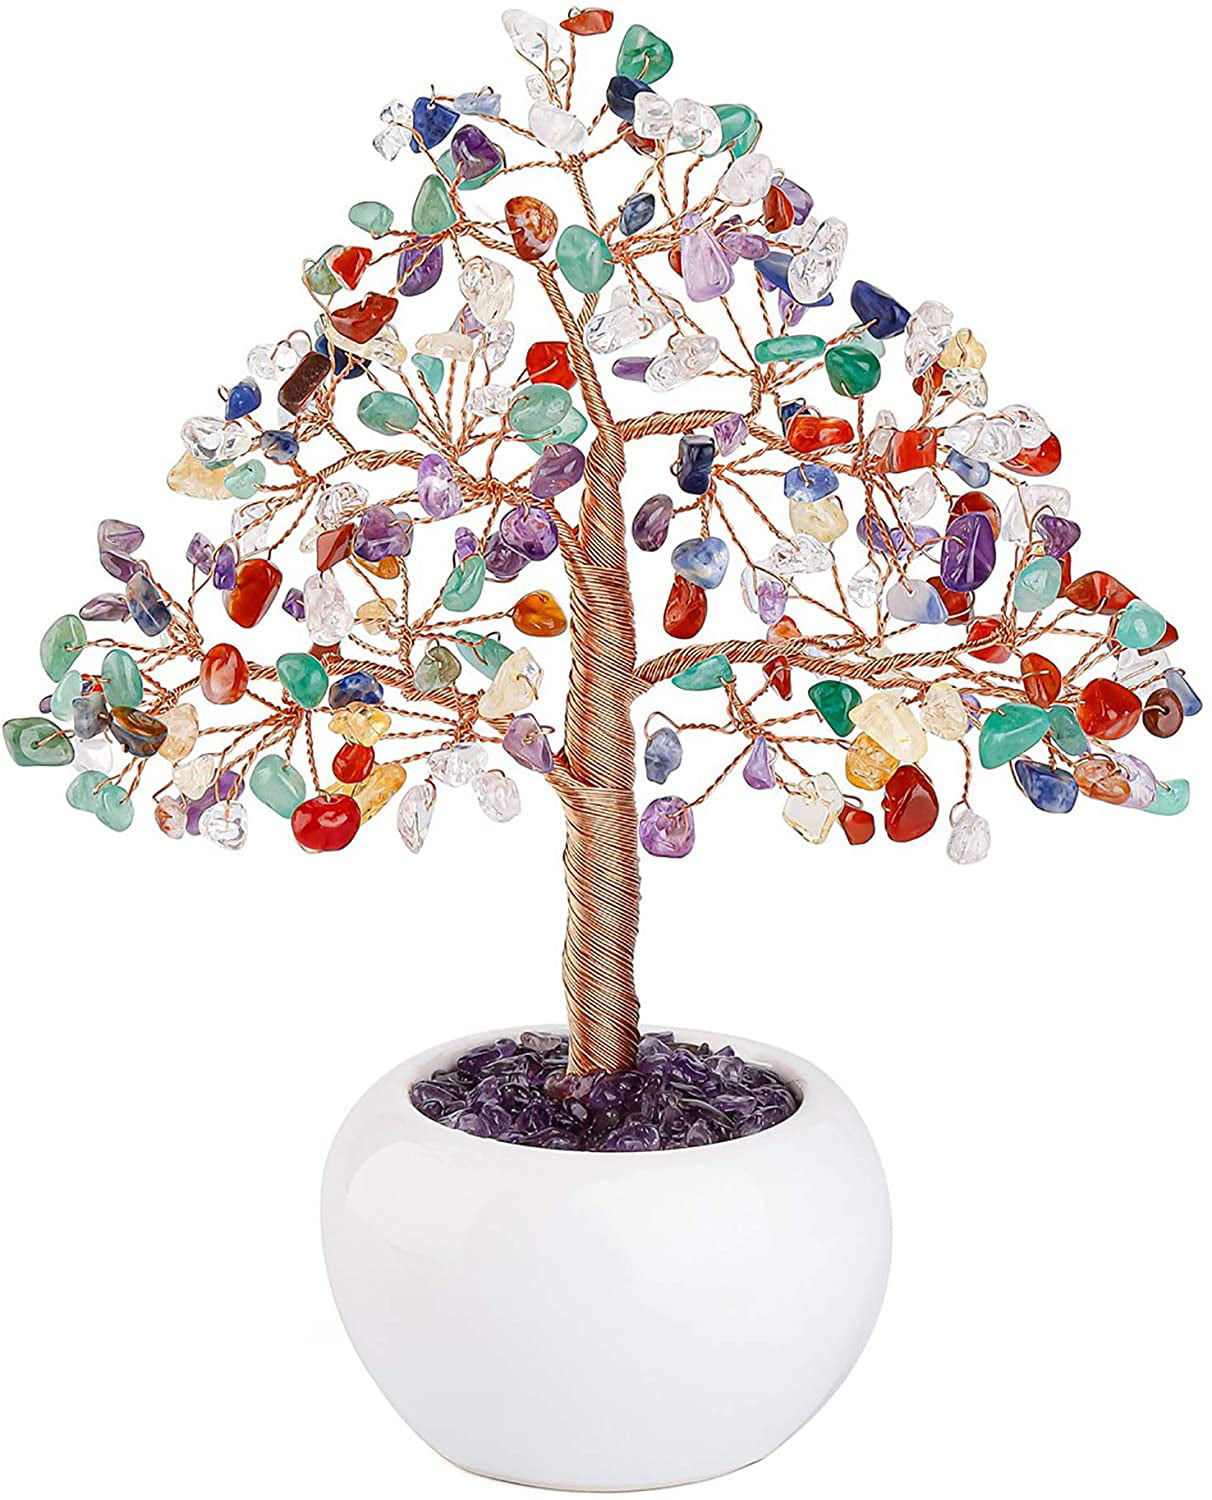 Crystal Quartz Chakra Natural Stone Wire Wound Design Tree Handcrafted Tree, Crystal Tree Chakra Healing